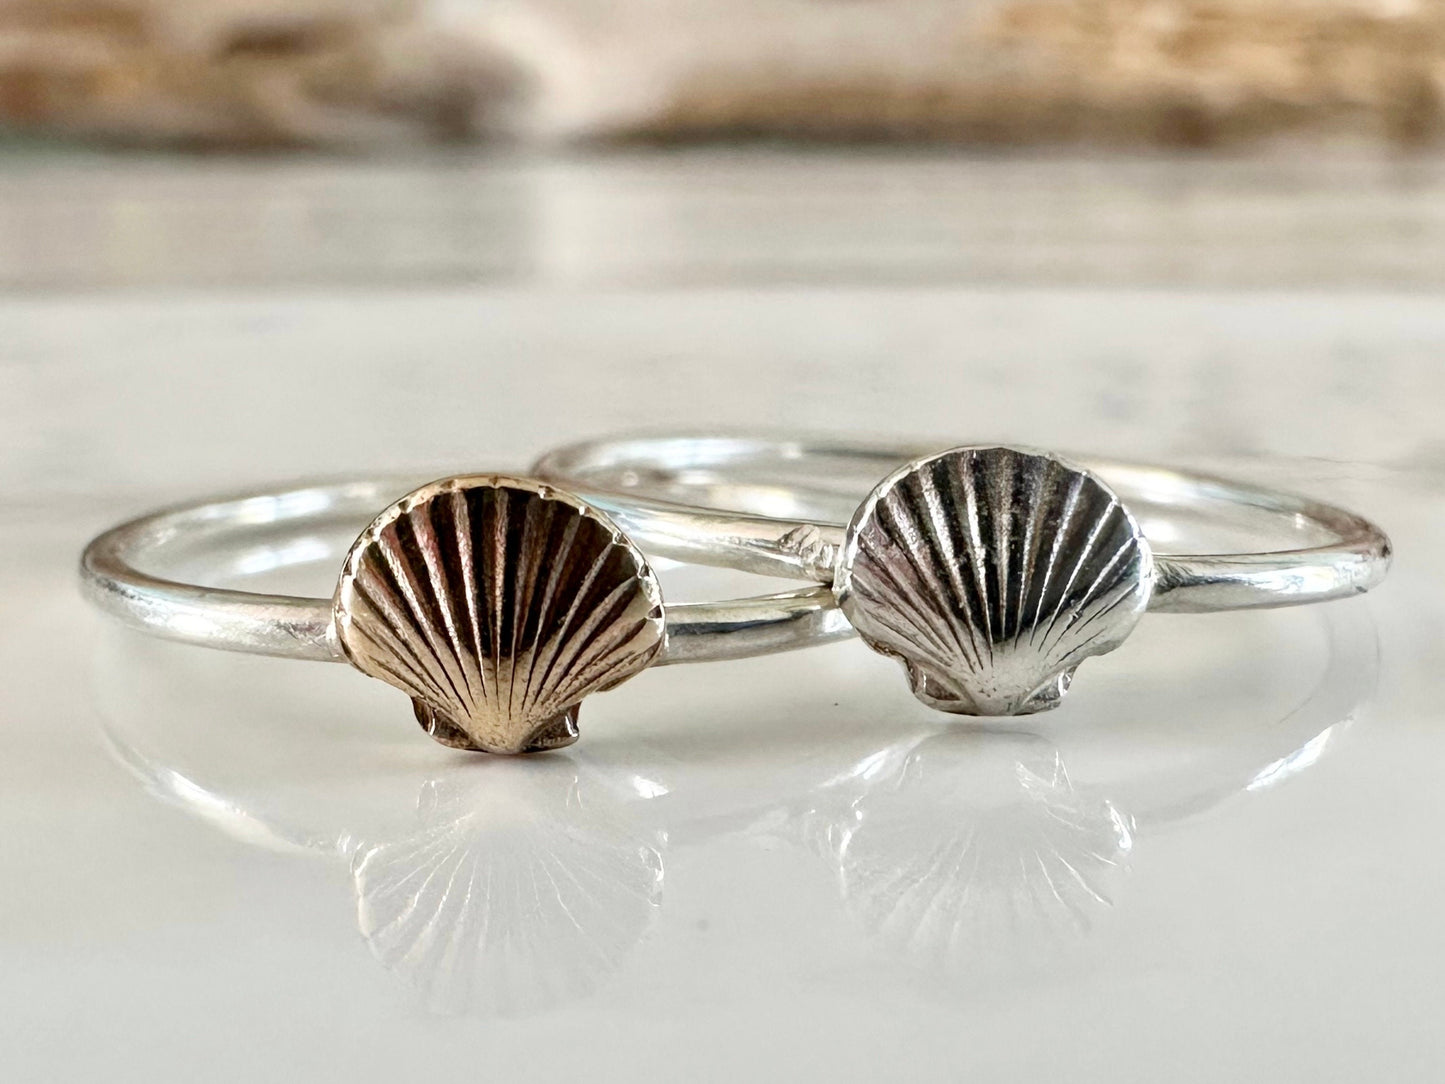 Scallop Shell Stacking Ring, Solid 9ct Gold or Sterling Silver Shell on a 1.2mm 925 Sterling Silver Ring Band, Seashell Ring